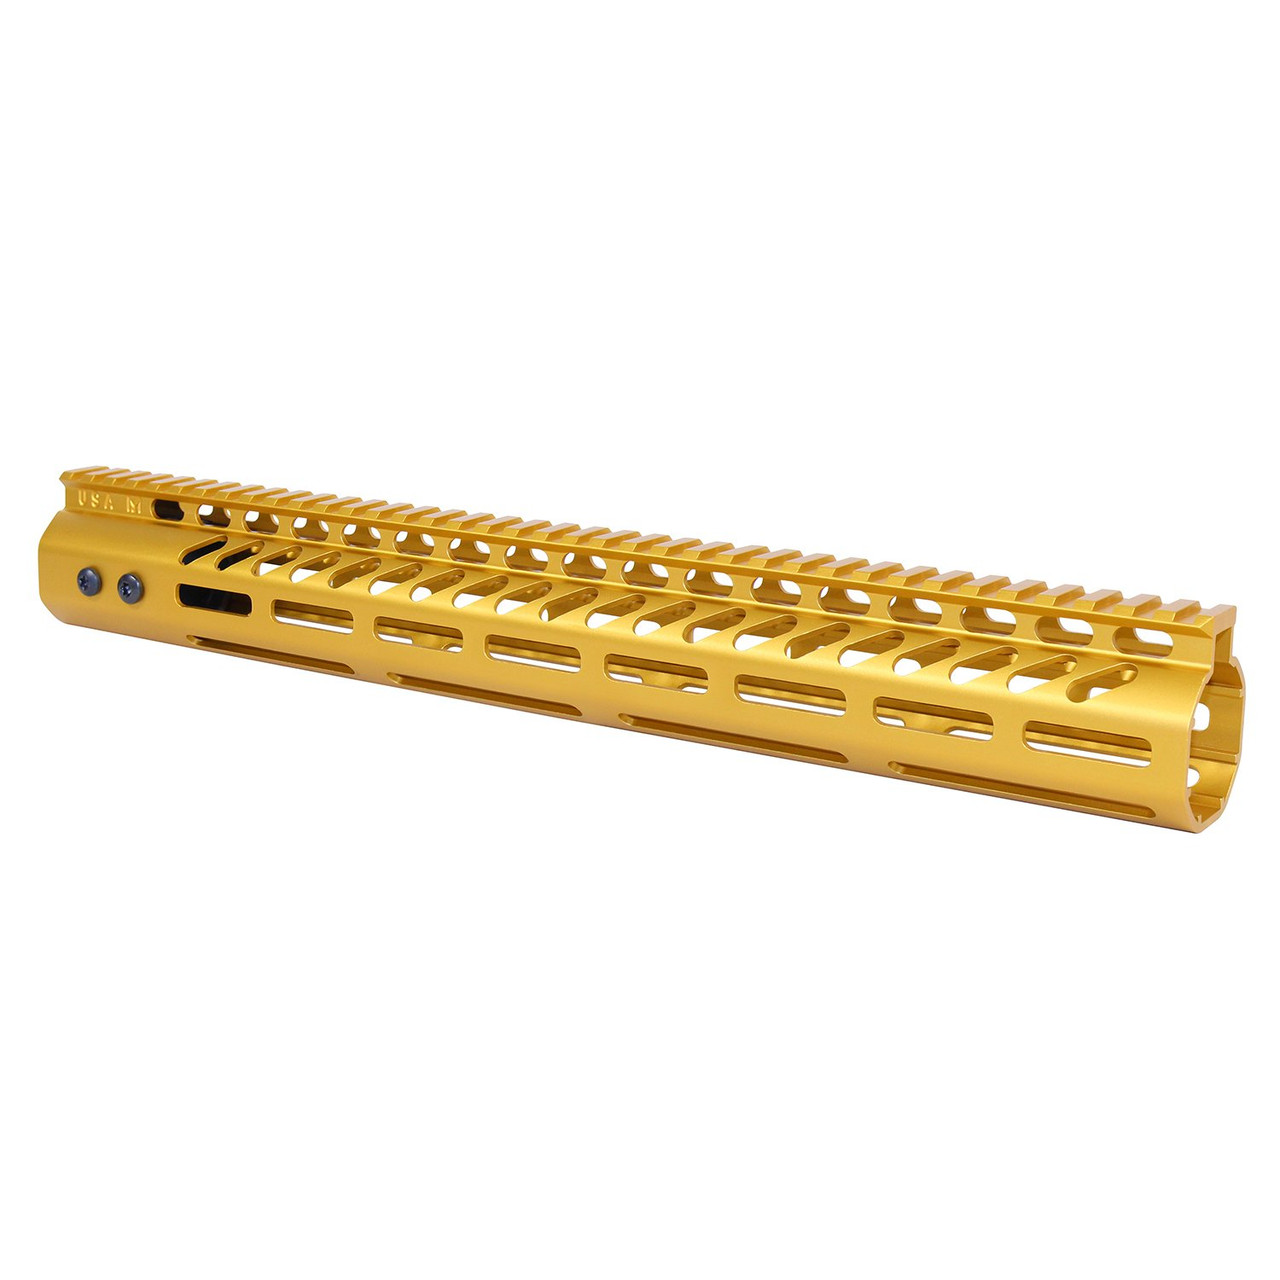 Guntec USA GT-15MLK-308-GOLD 15" Ultra Lightweight Thin M-LOK System Free Floating Handguard With Monolithic Top Rail (.308 Cal) (Anodized Gold)